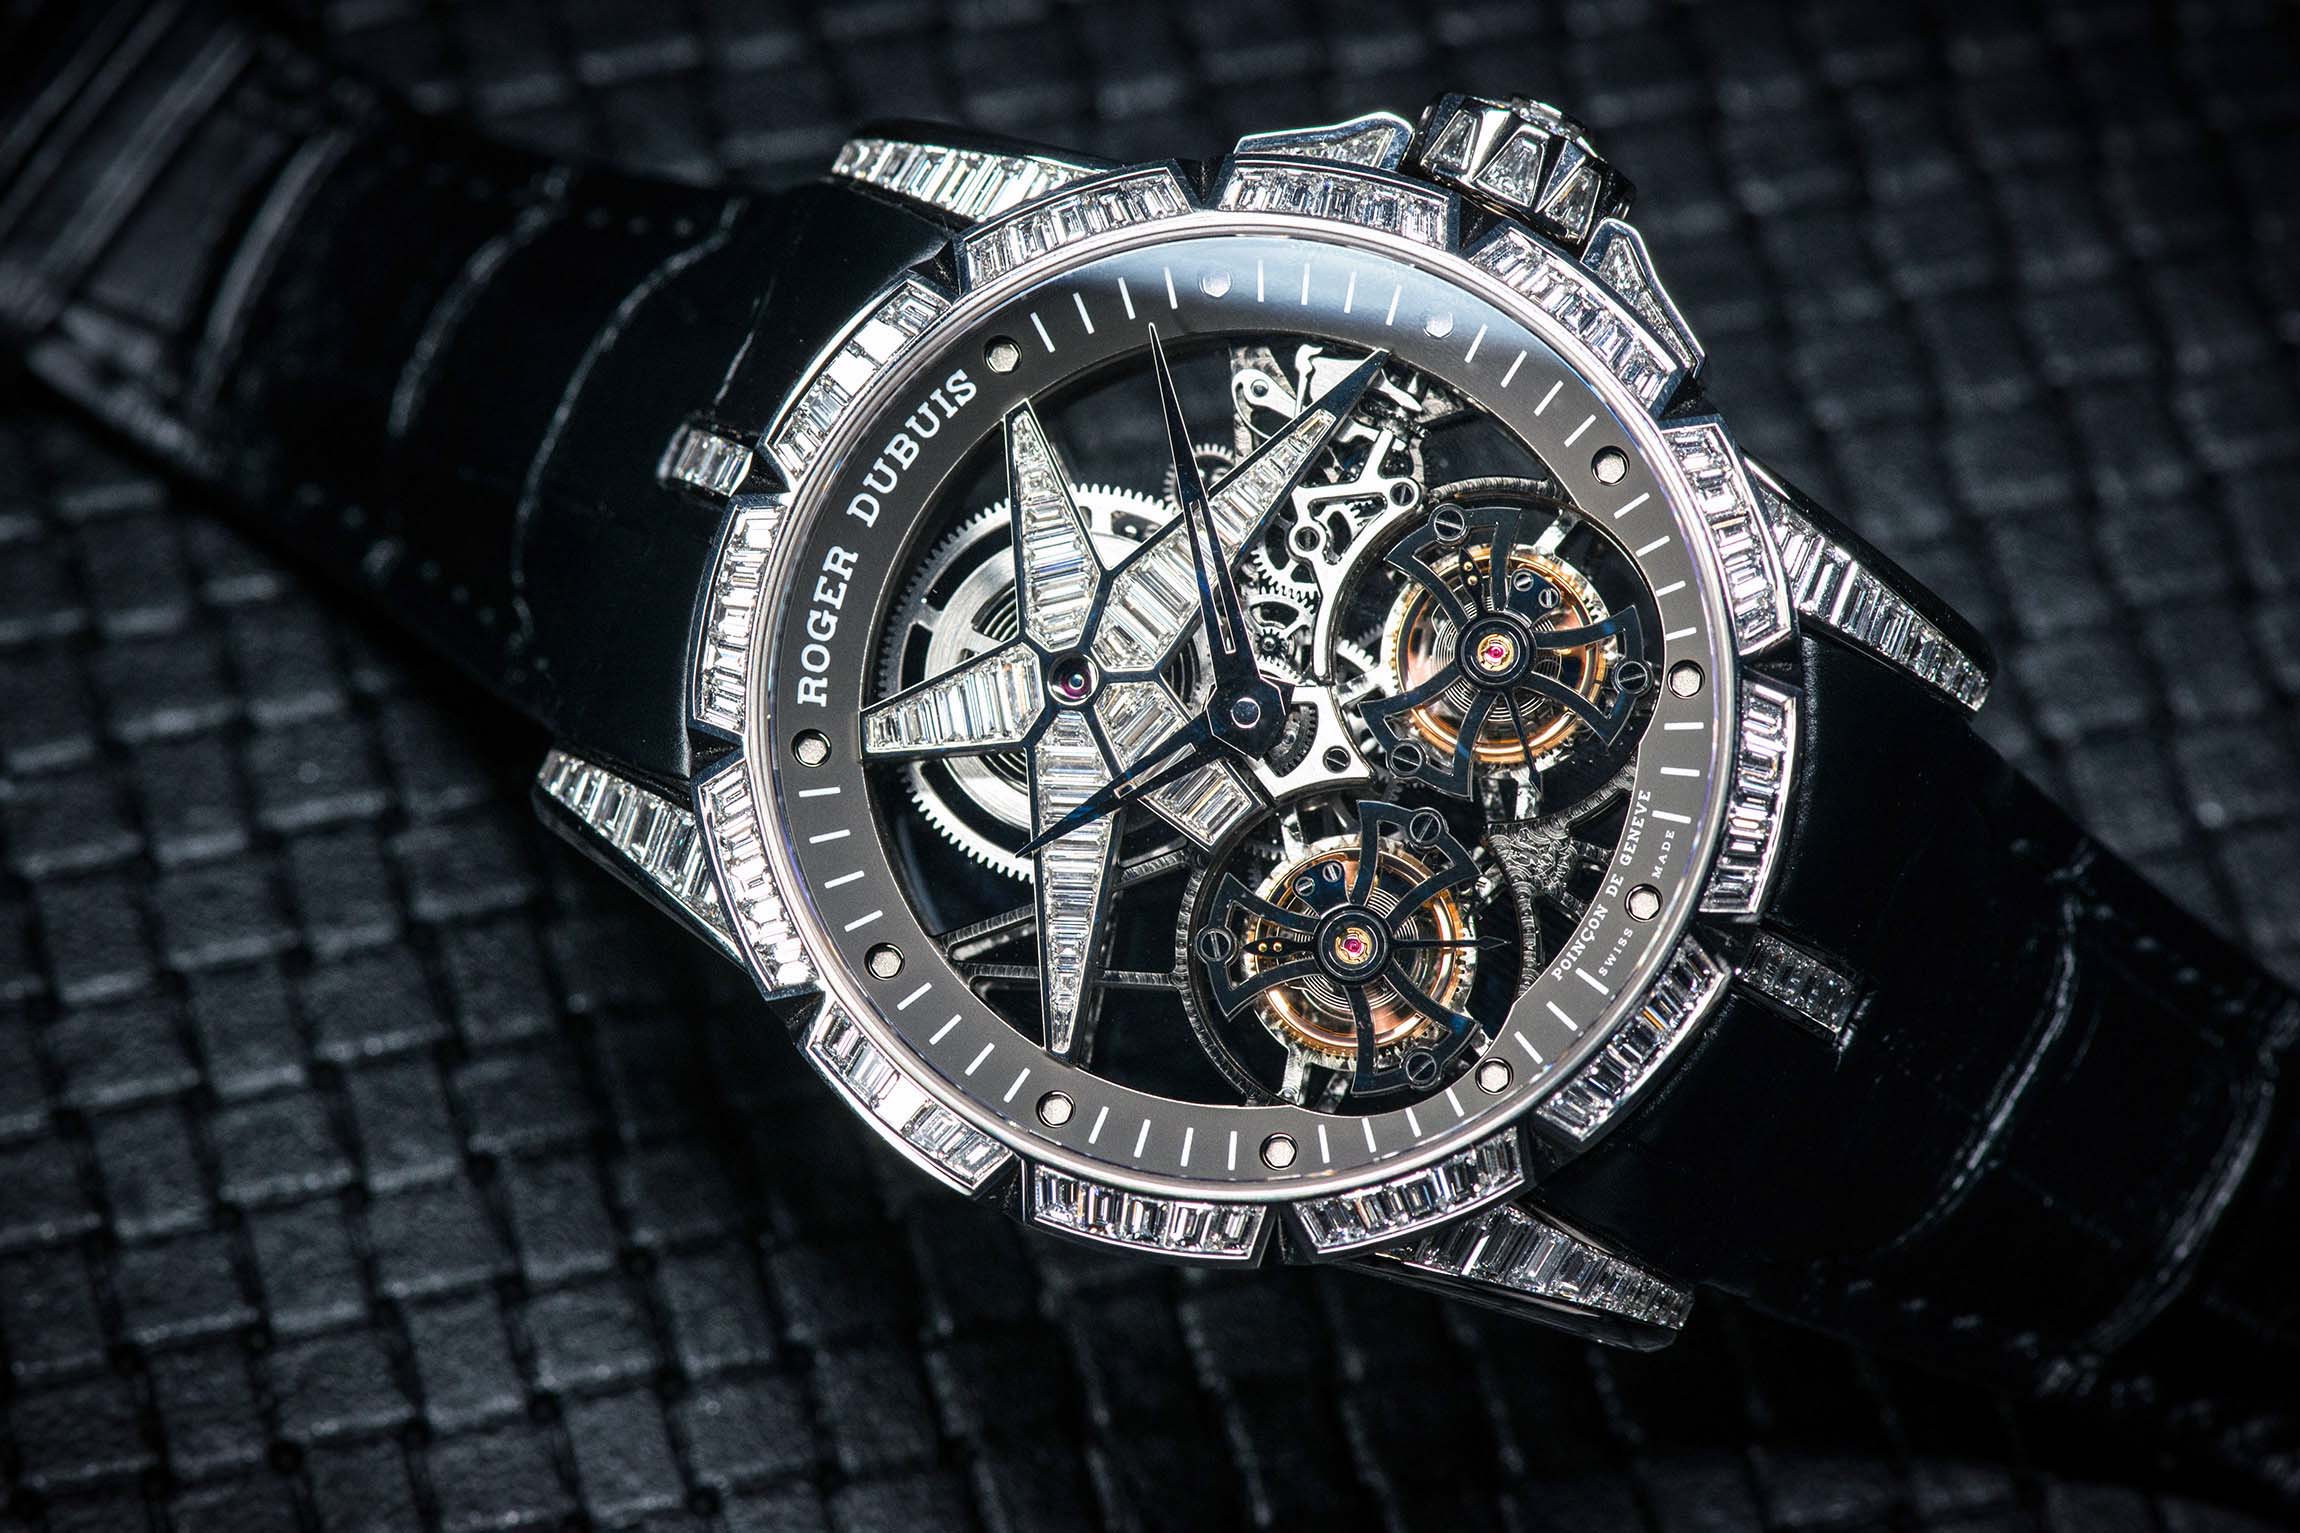 Introducing The Roger Dubuis Excalibur Star Of Infinity At Watches & Wonders 2015 (Live Pics, Specs…)